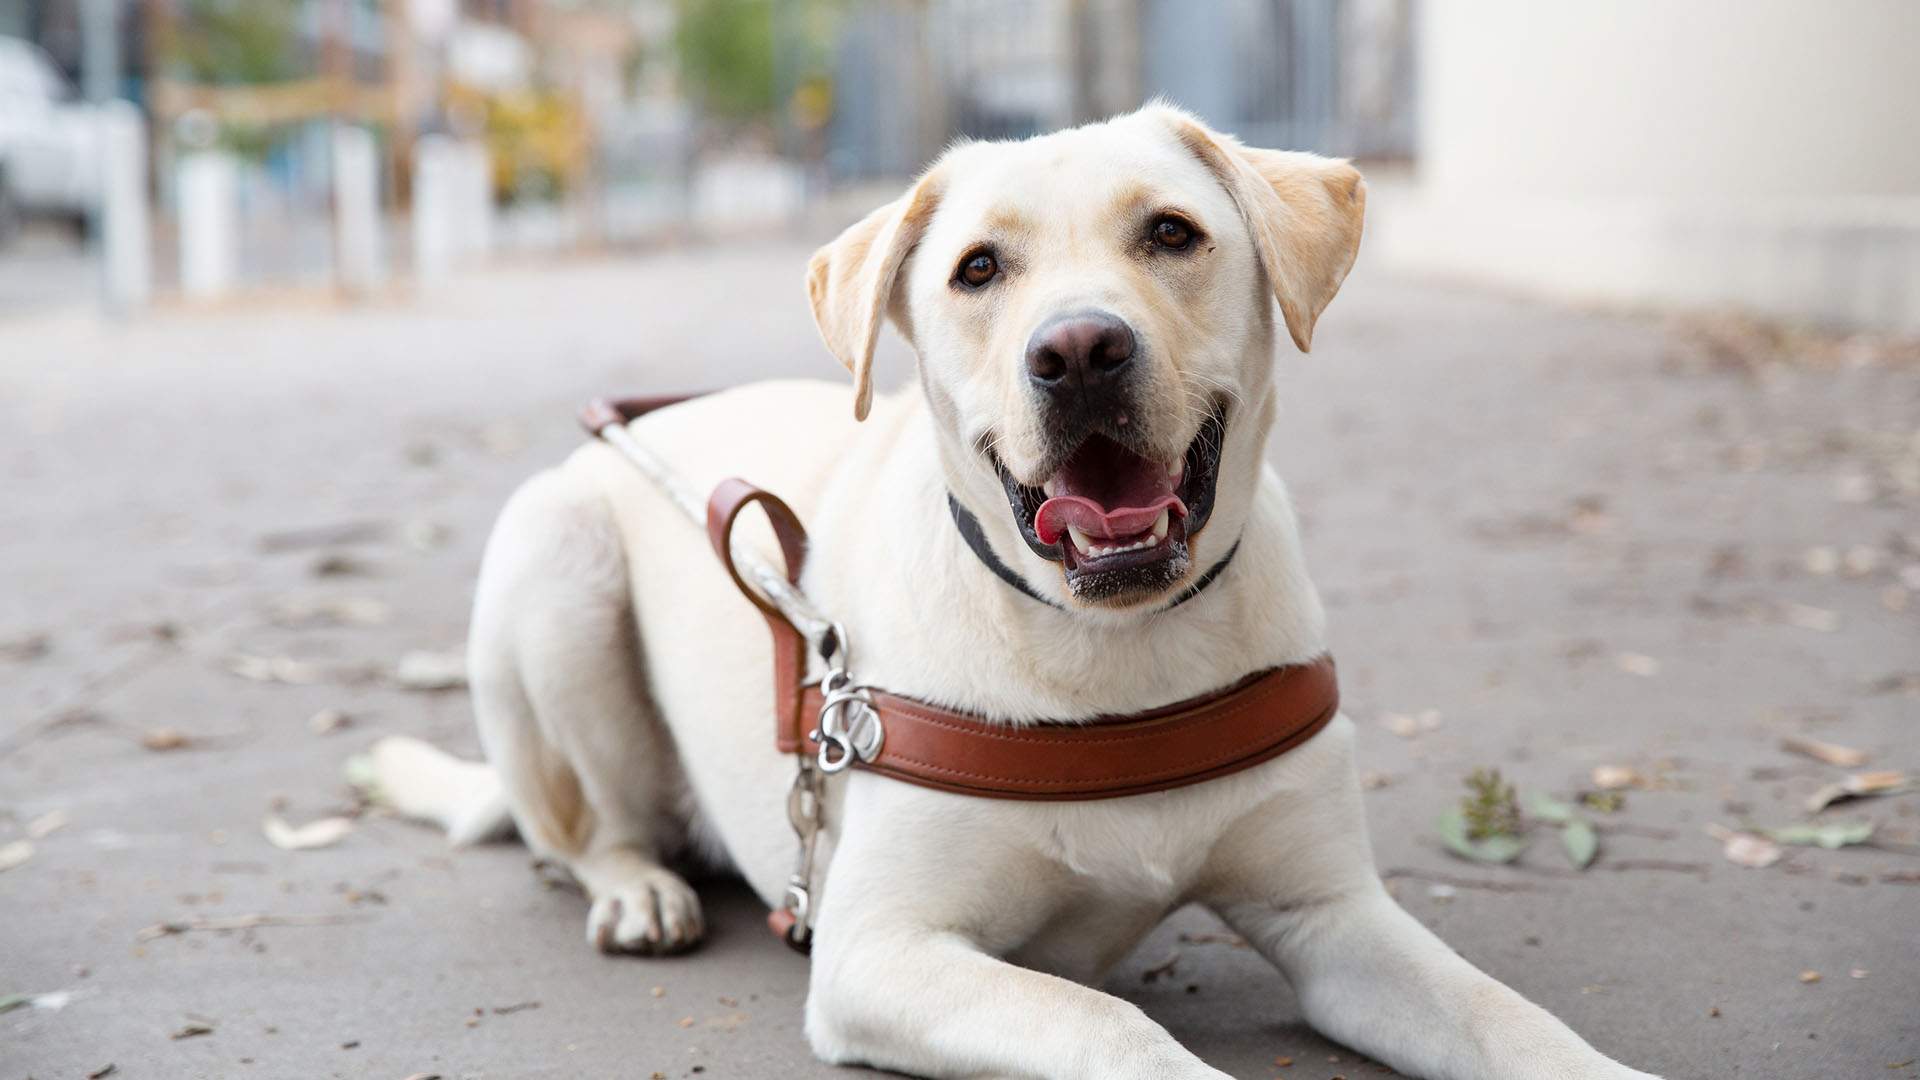 'Born to Lead' Is the Adorable New Docuseries That Goes Behind the Scenes at Guide Dogs Australia